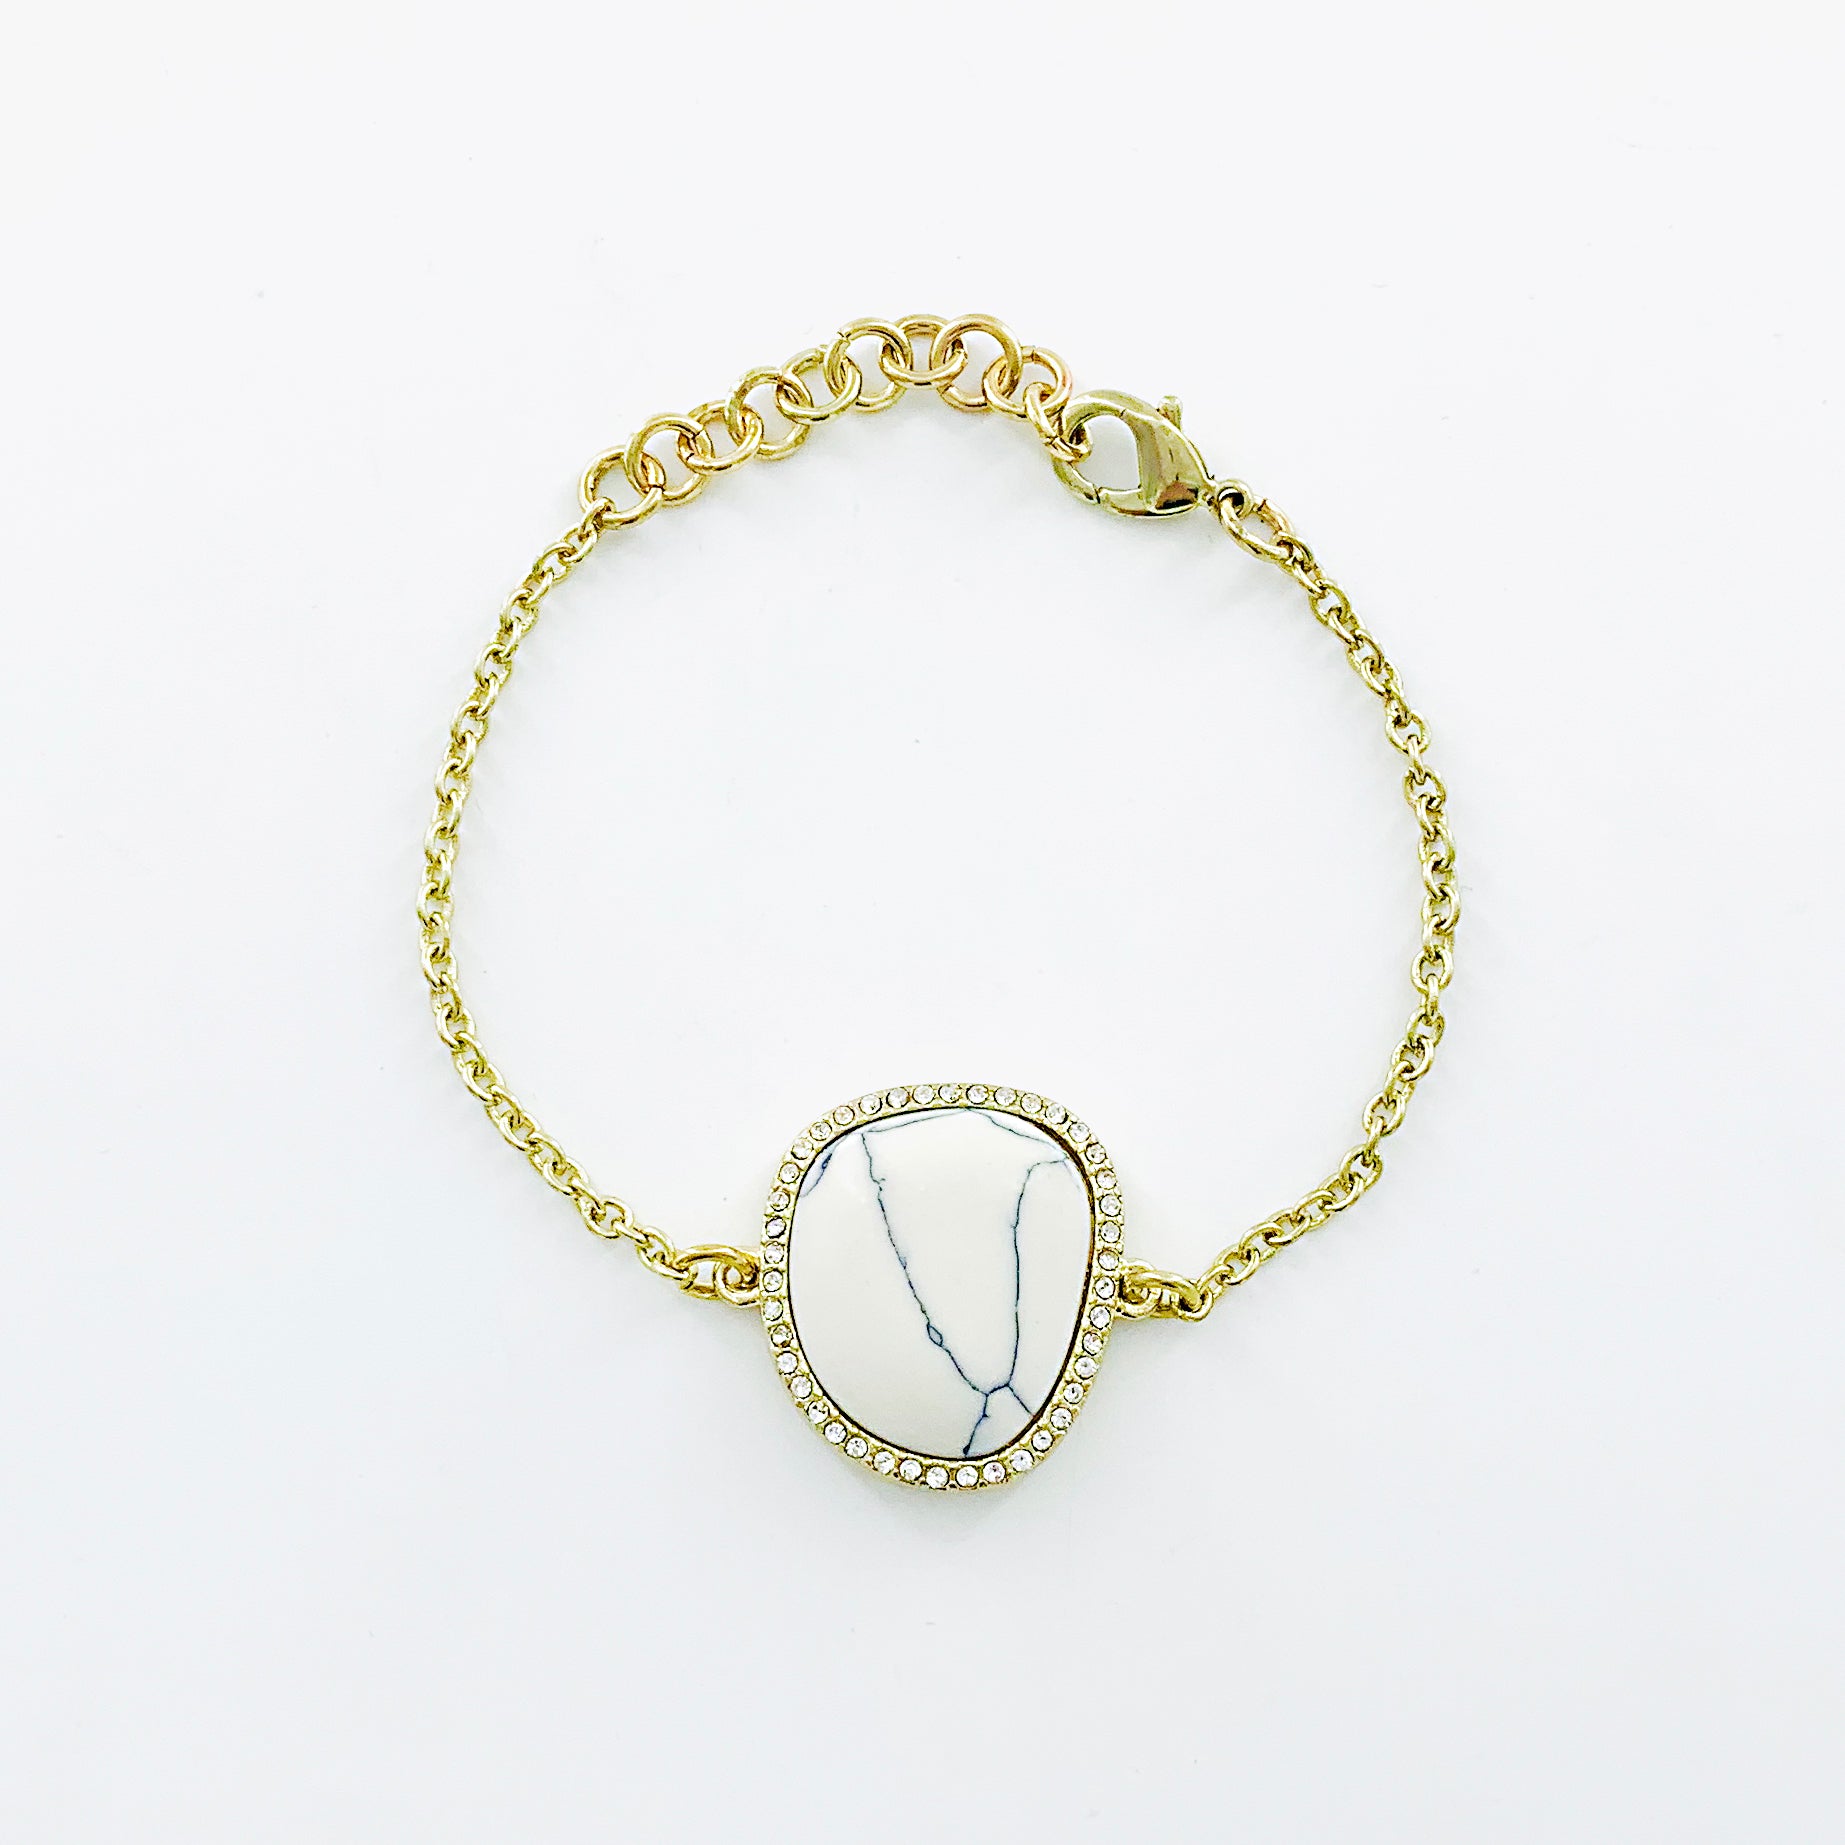 Gold bracelet with marble stone